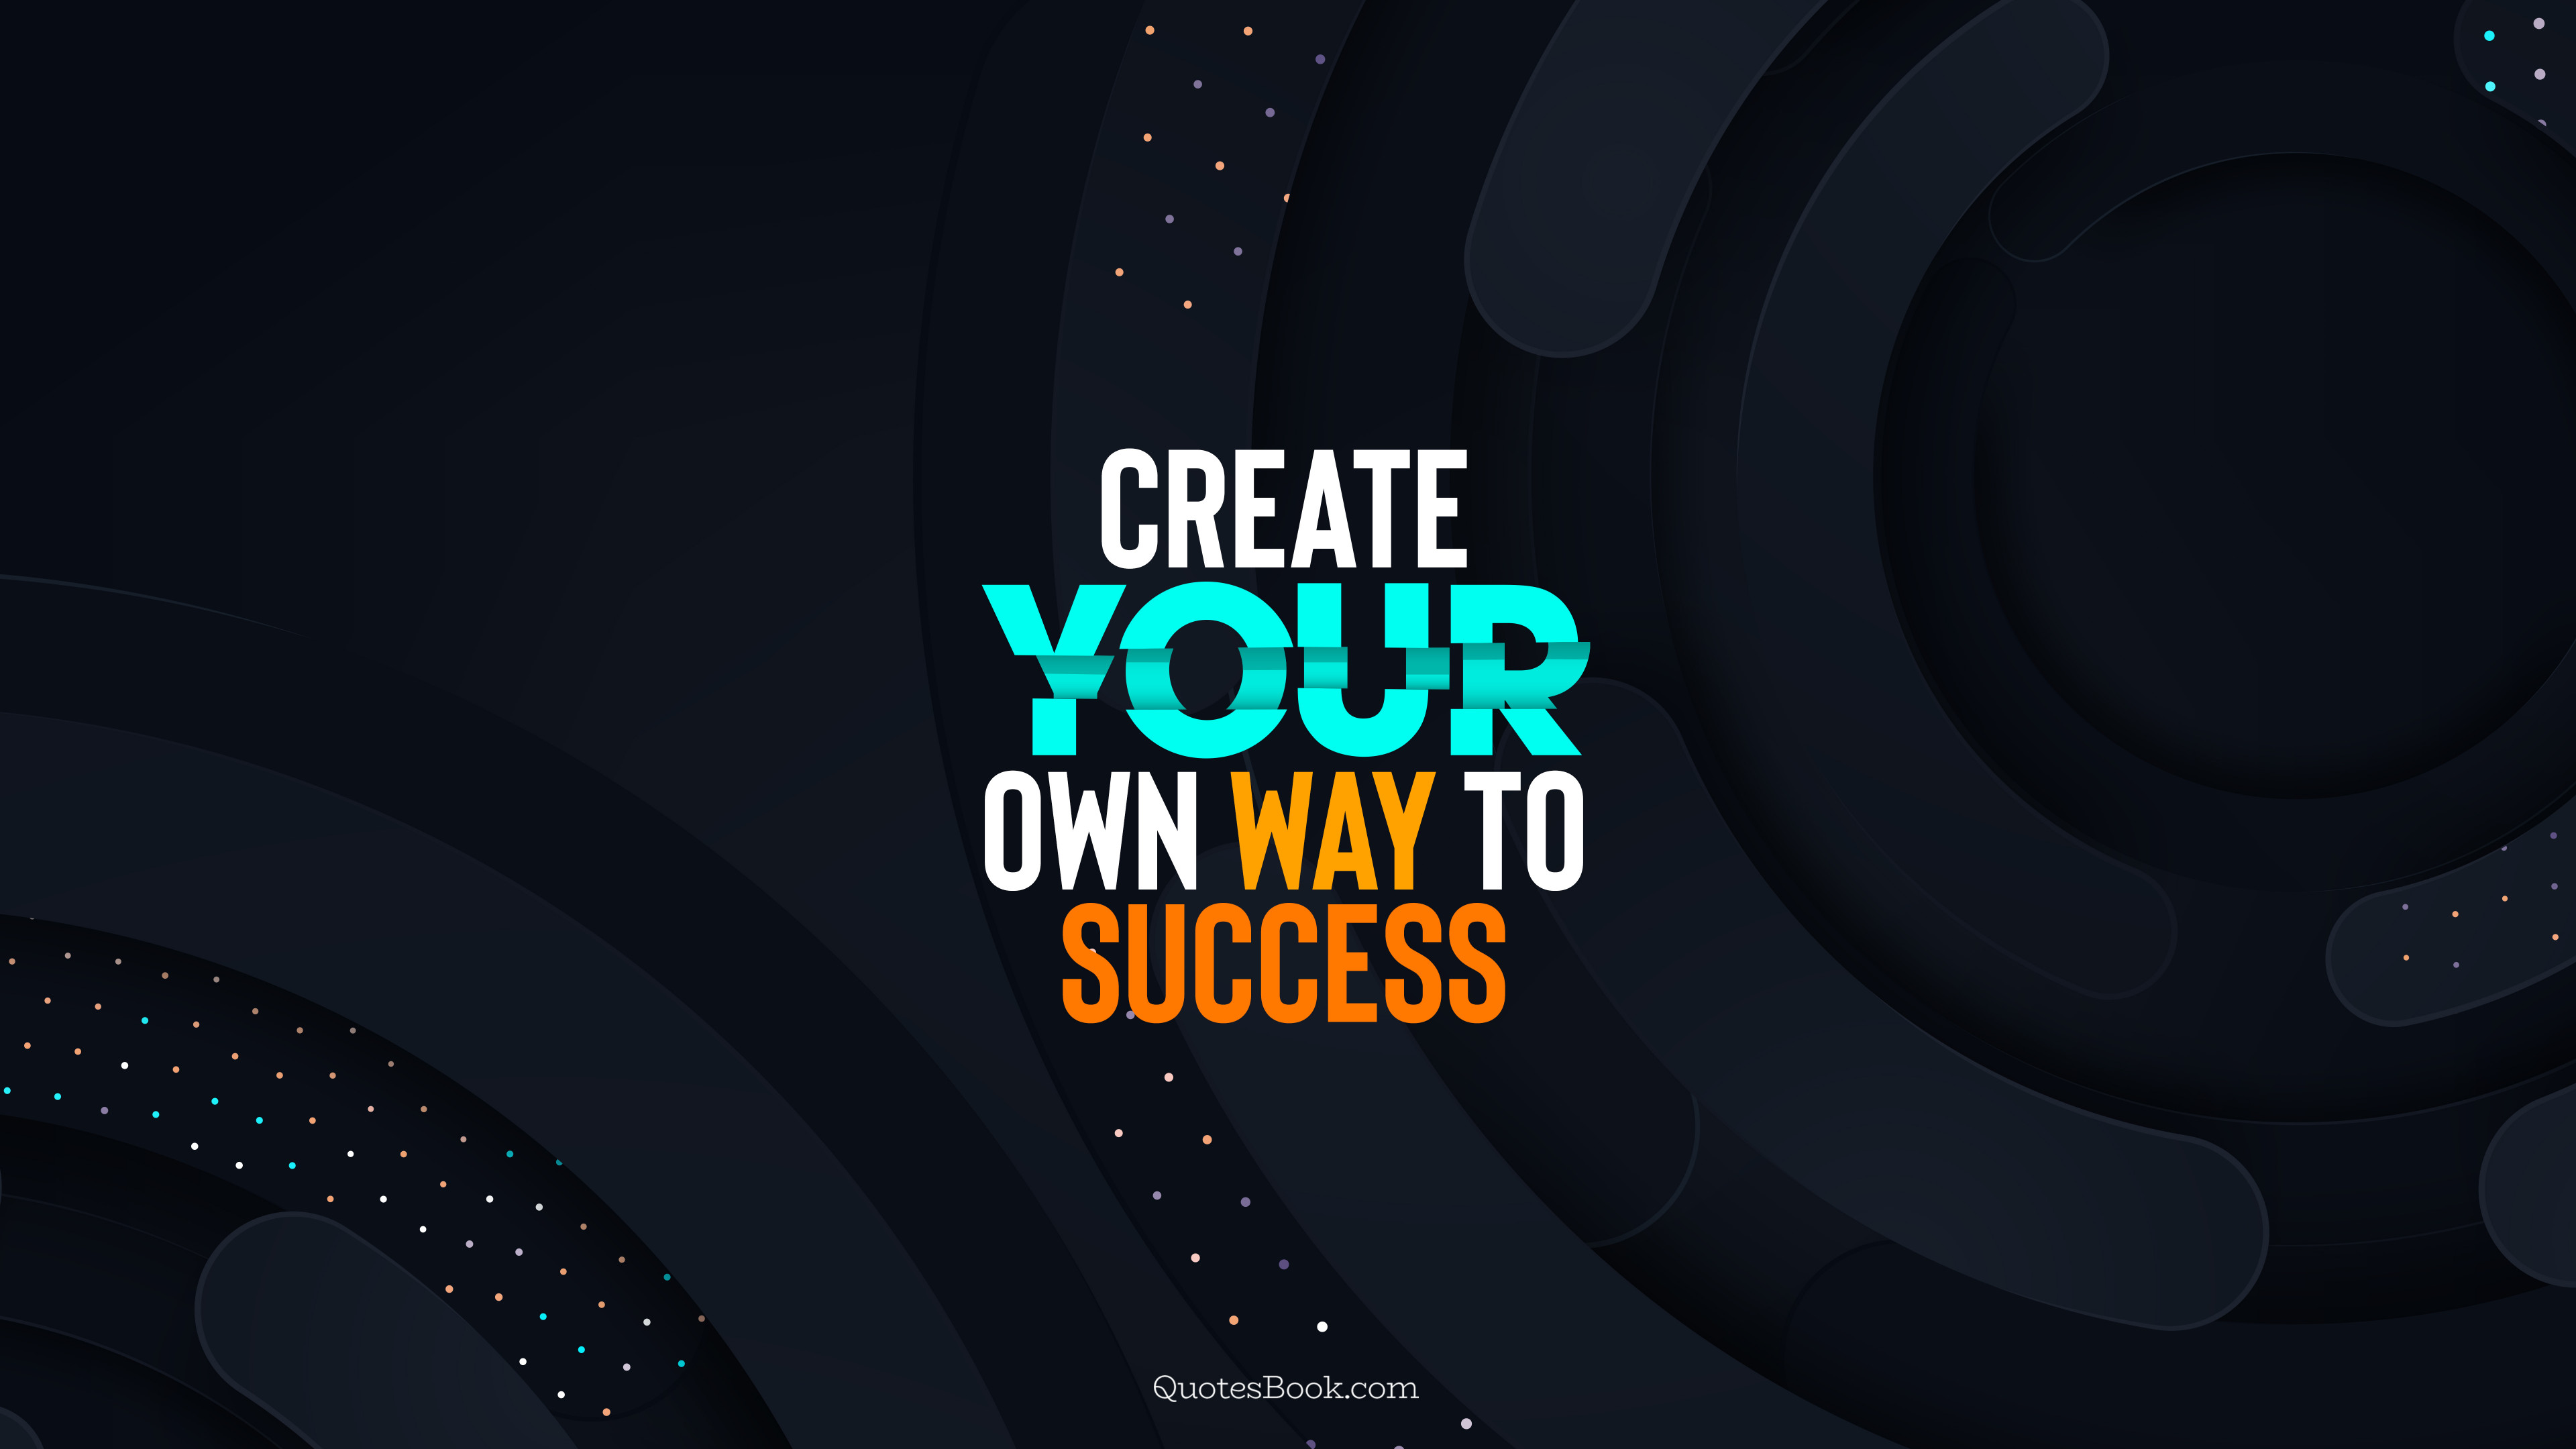 Create your own way to success - QuotesBook